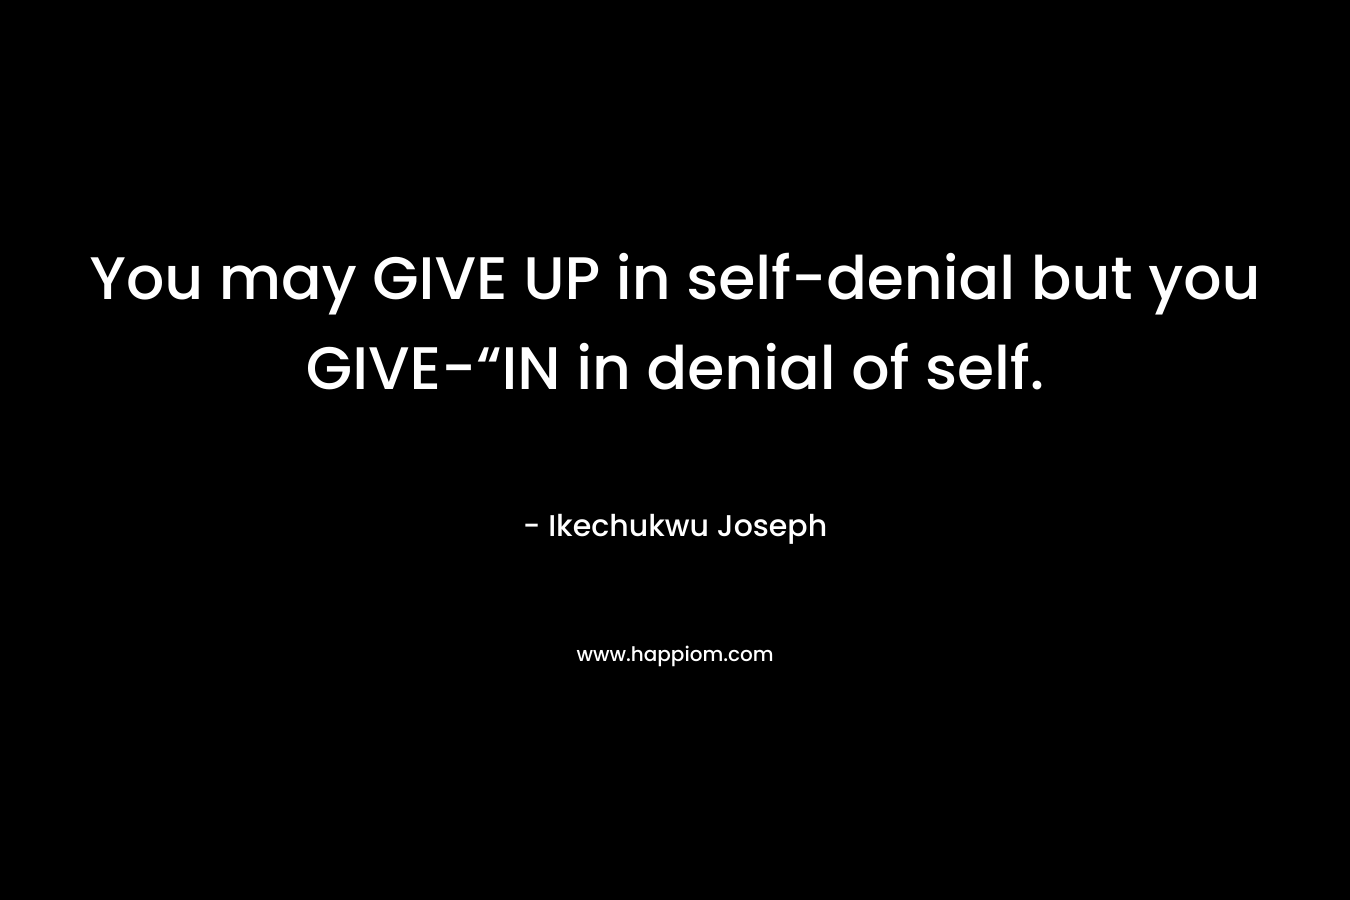 You may GIVE UP in self-denial but you GIVE-“IN in denial of self. – Ikechukwu Joseph